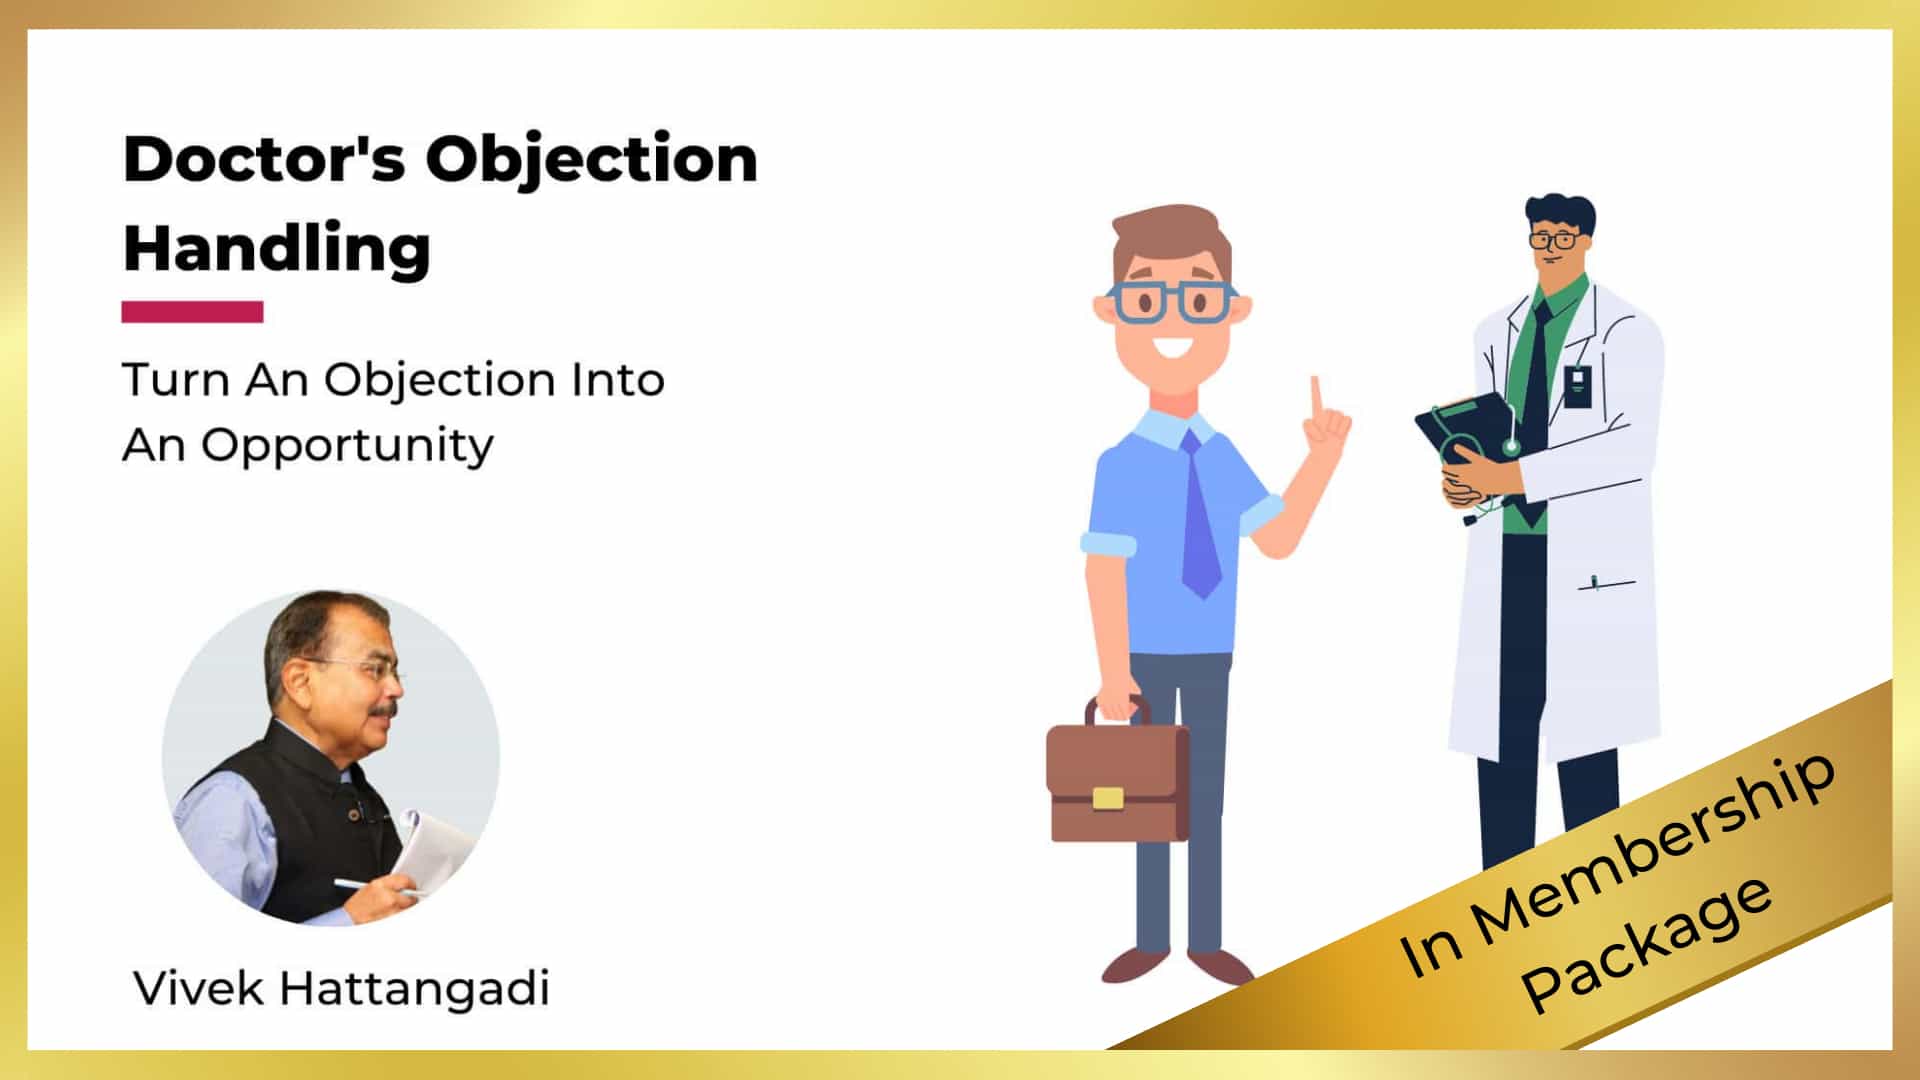 Handling Doctor’s Objection-Turn An Objection Into An Opportunity by Vivek Hattangadi